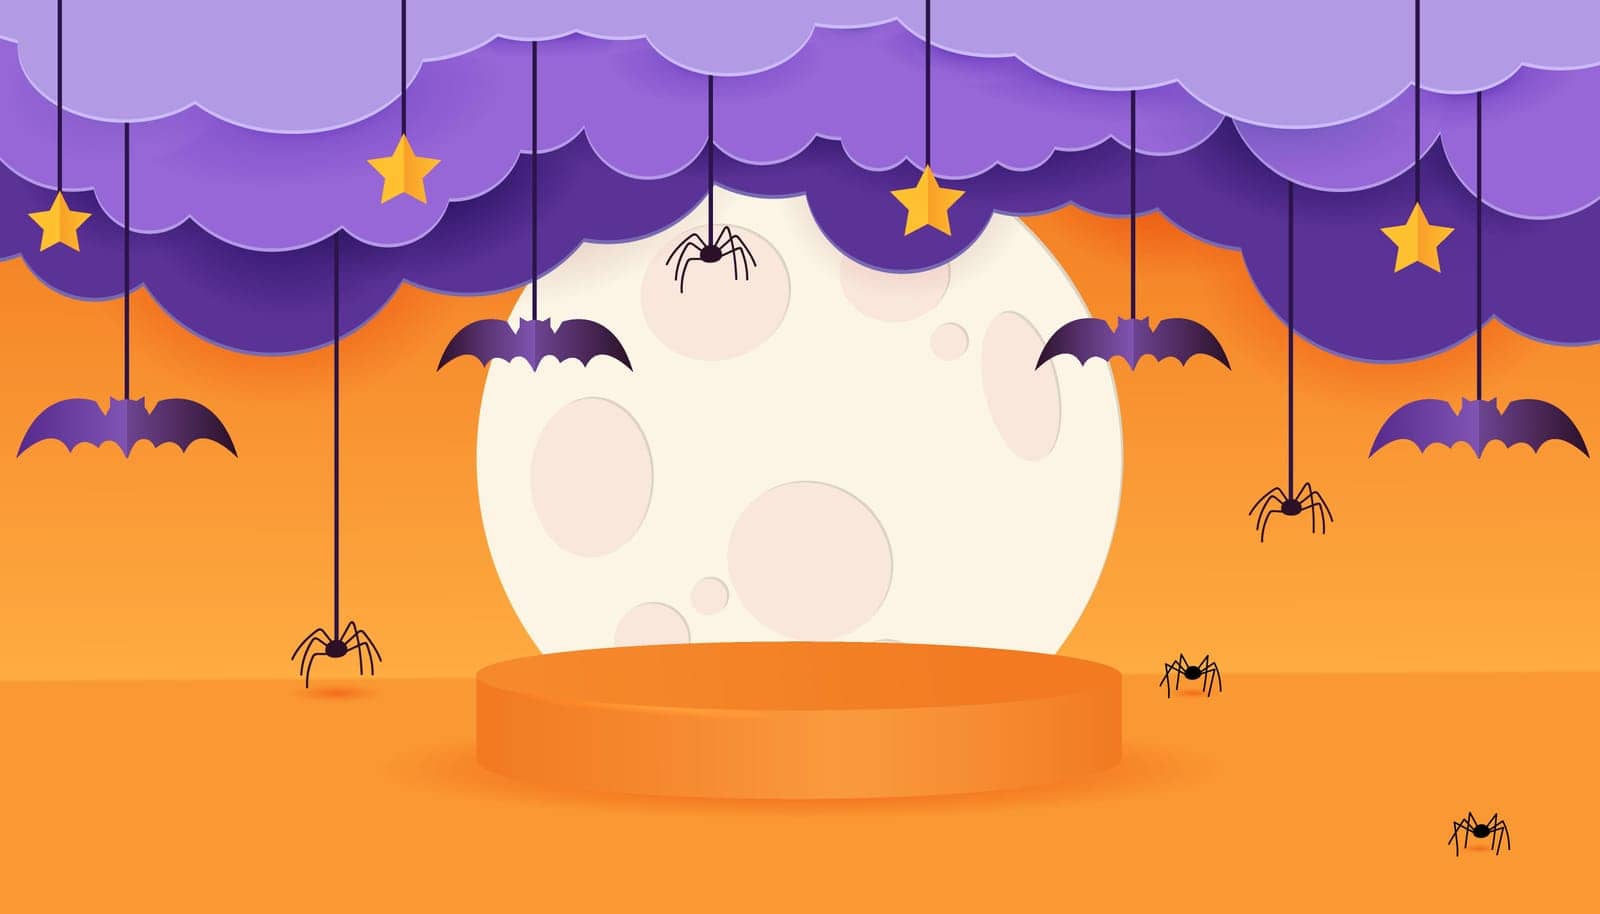 Happy Halloween banner or party invitation background with clouds, moon, bats and spiders in paper cut style. Orange 3d podium for halloween. Vector